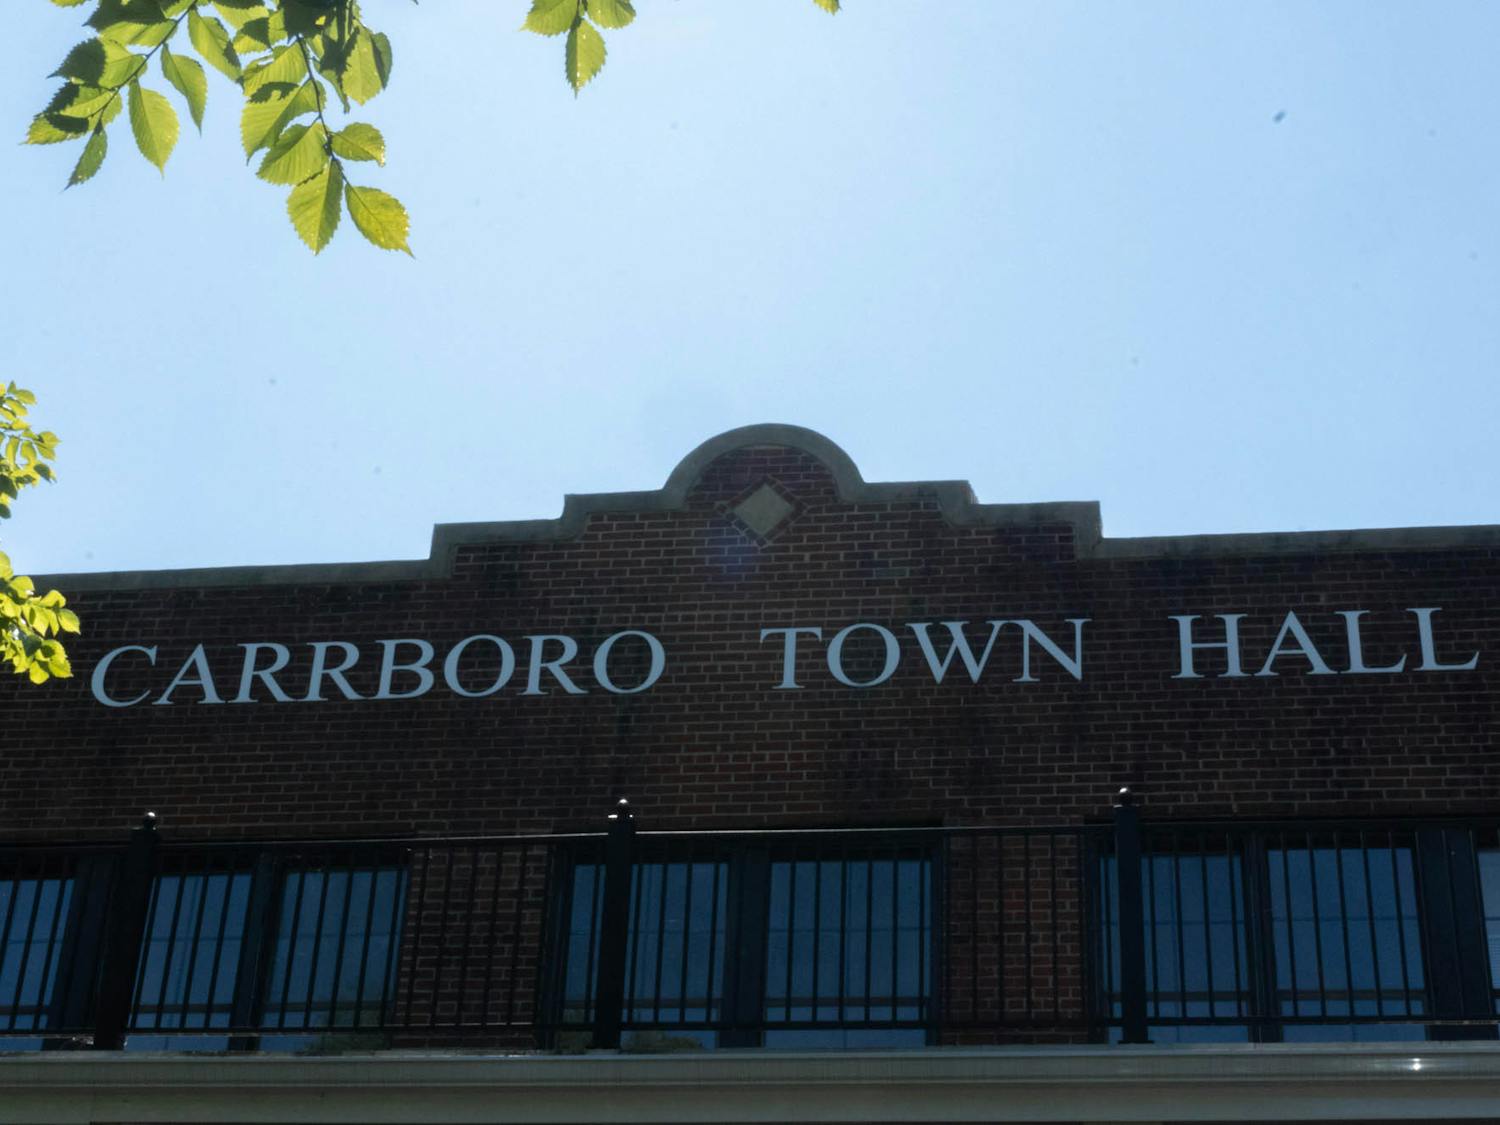 You_20230915_city-carrboro-town-council-preview-update-6.jpg